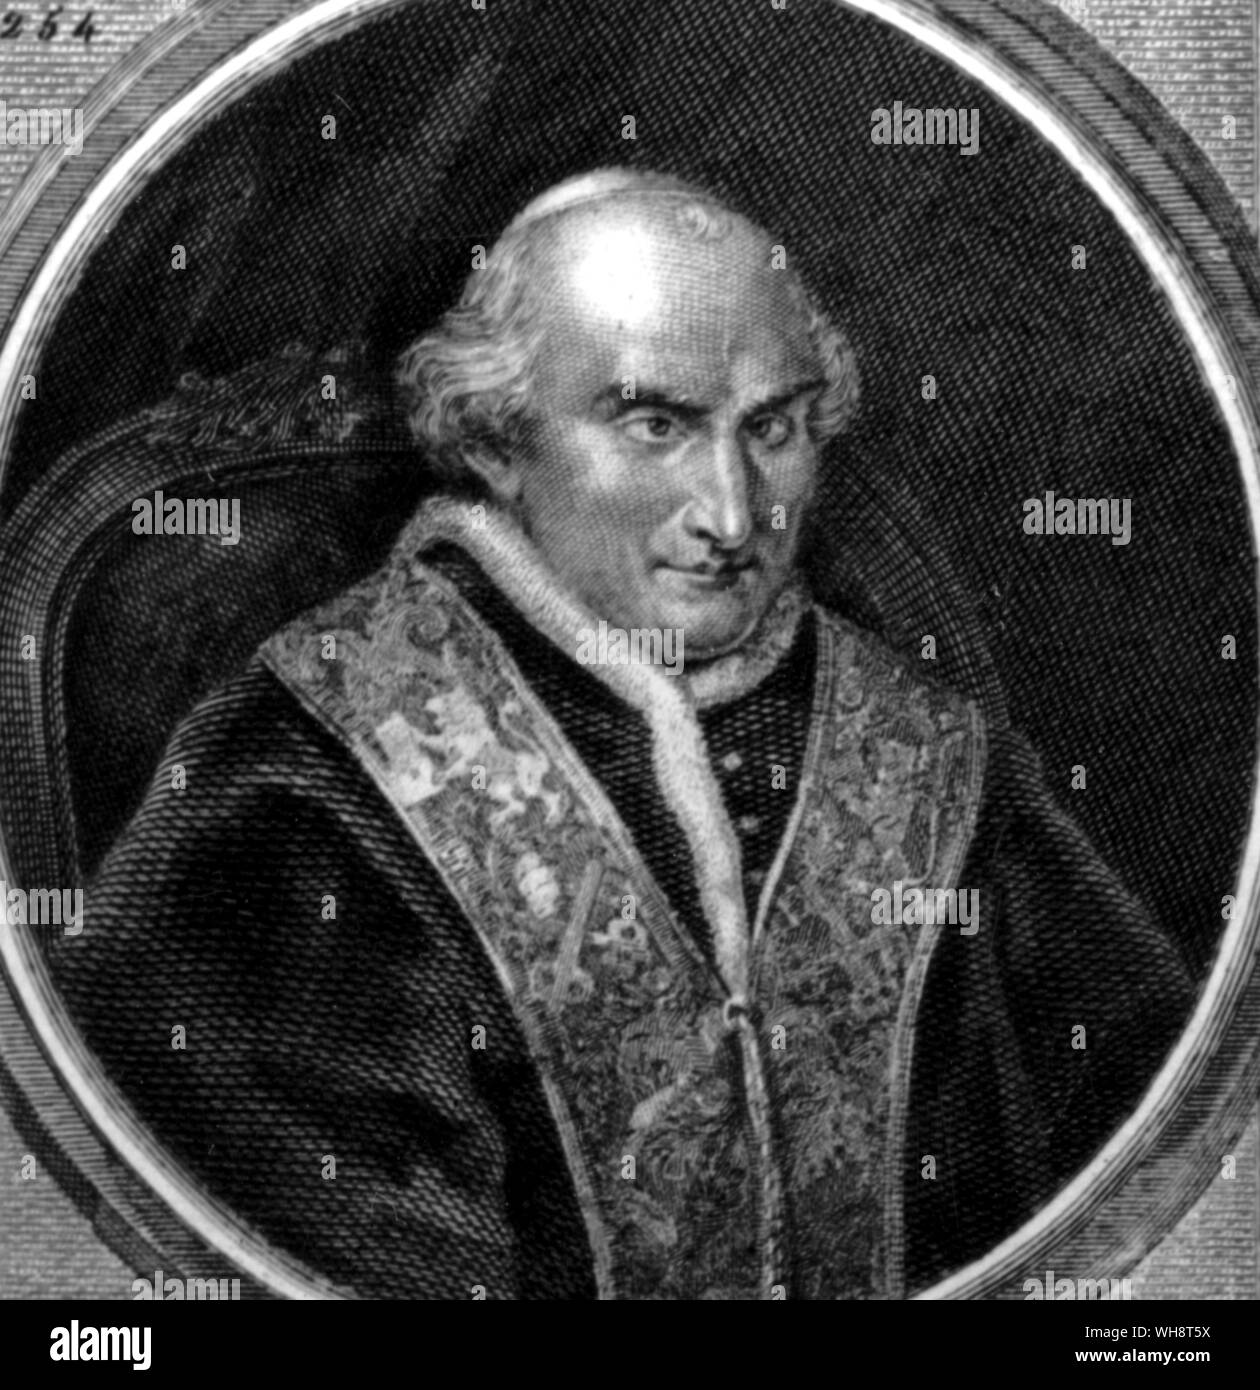 Pope pius viii and White Photos & Images Alamy